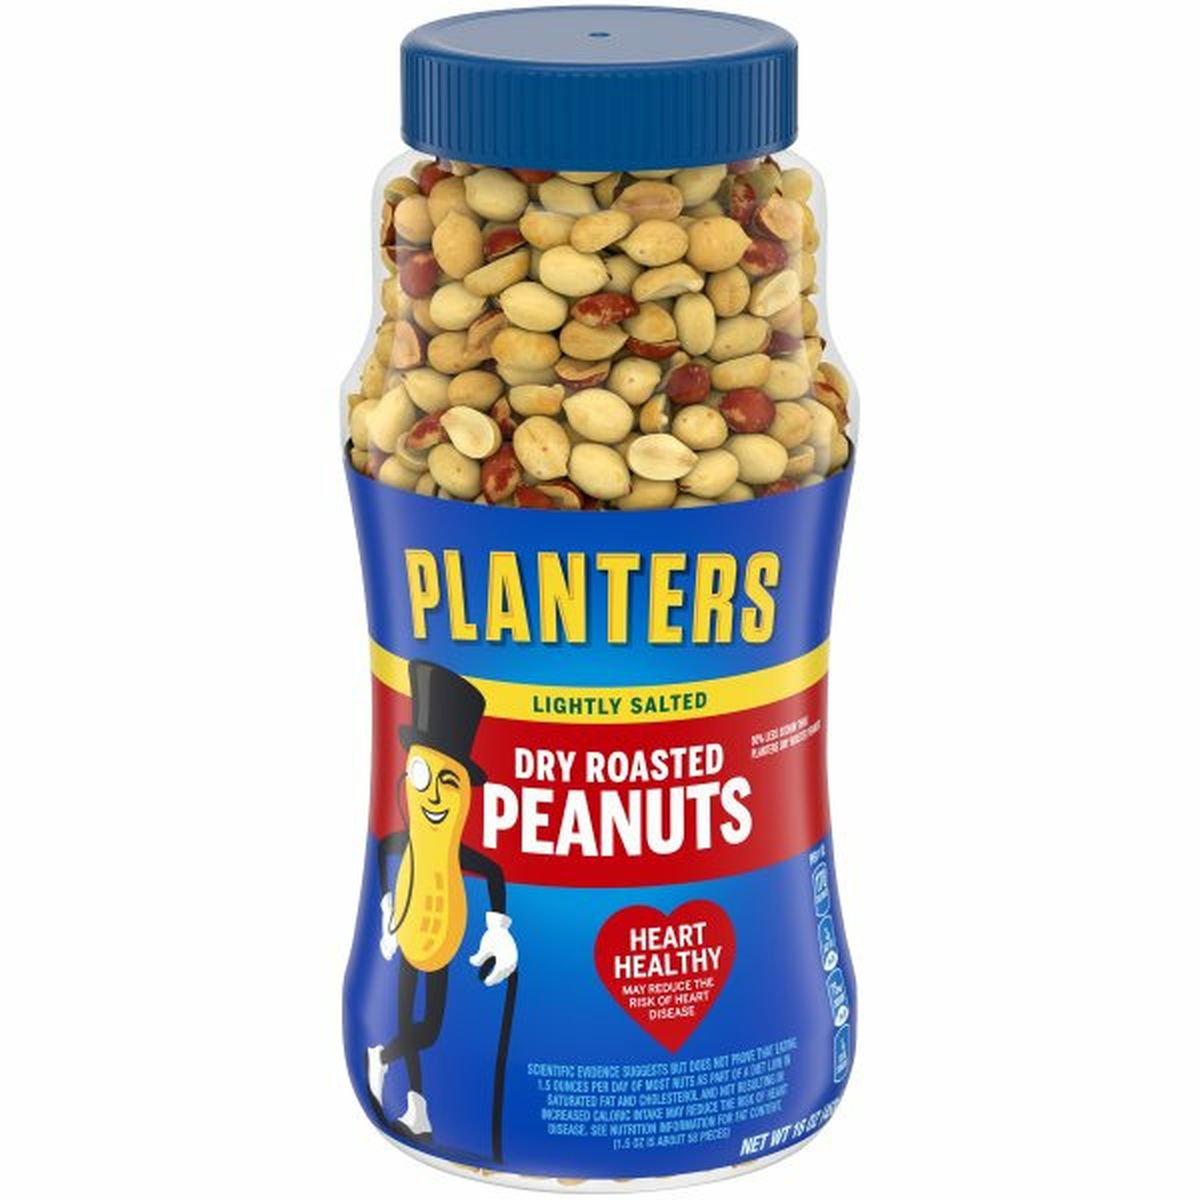 Calories in Planters Lightly Salted Dry Roasted Peanuts